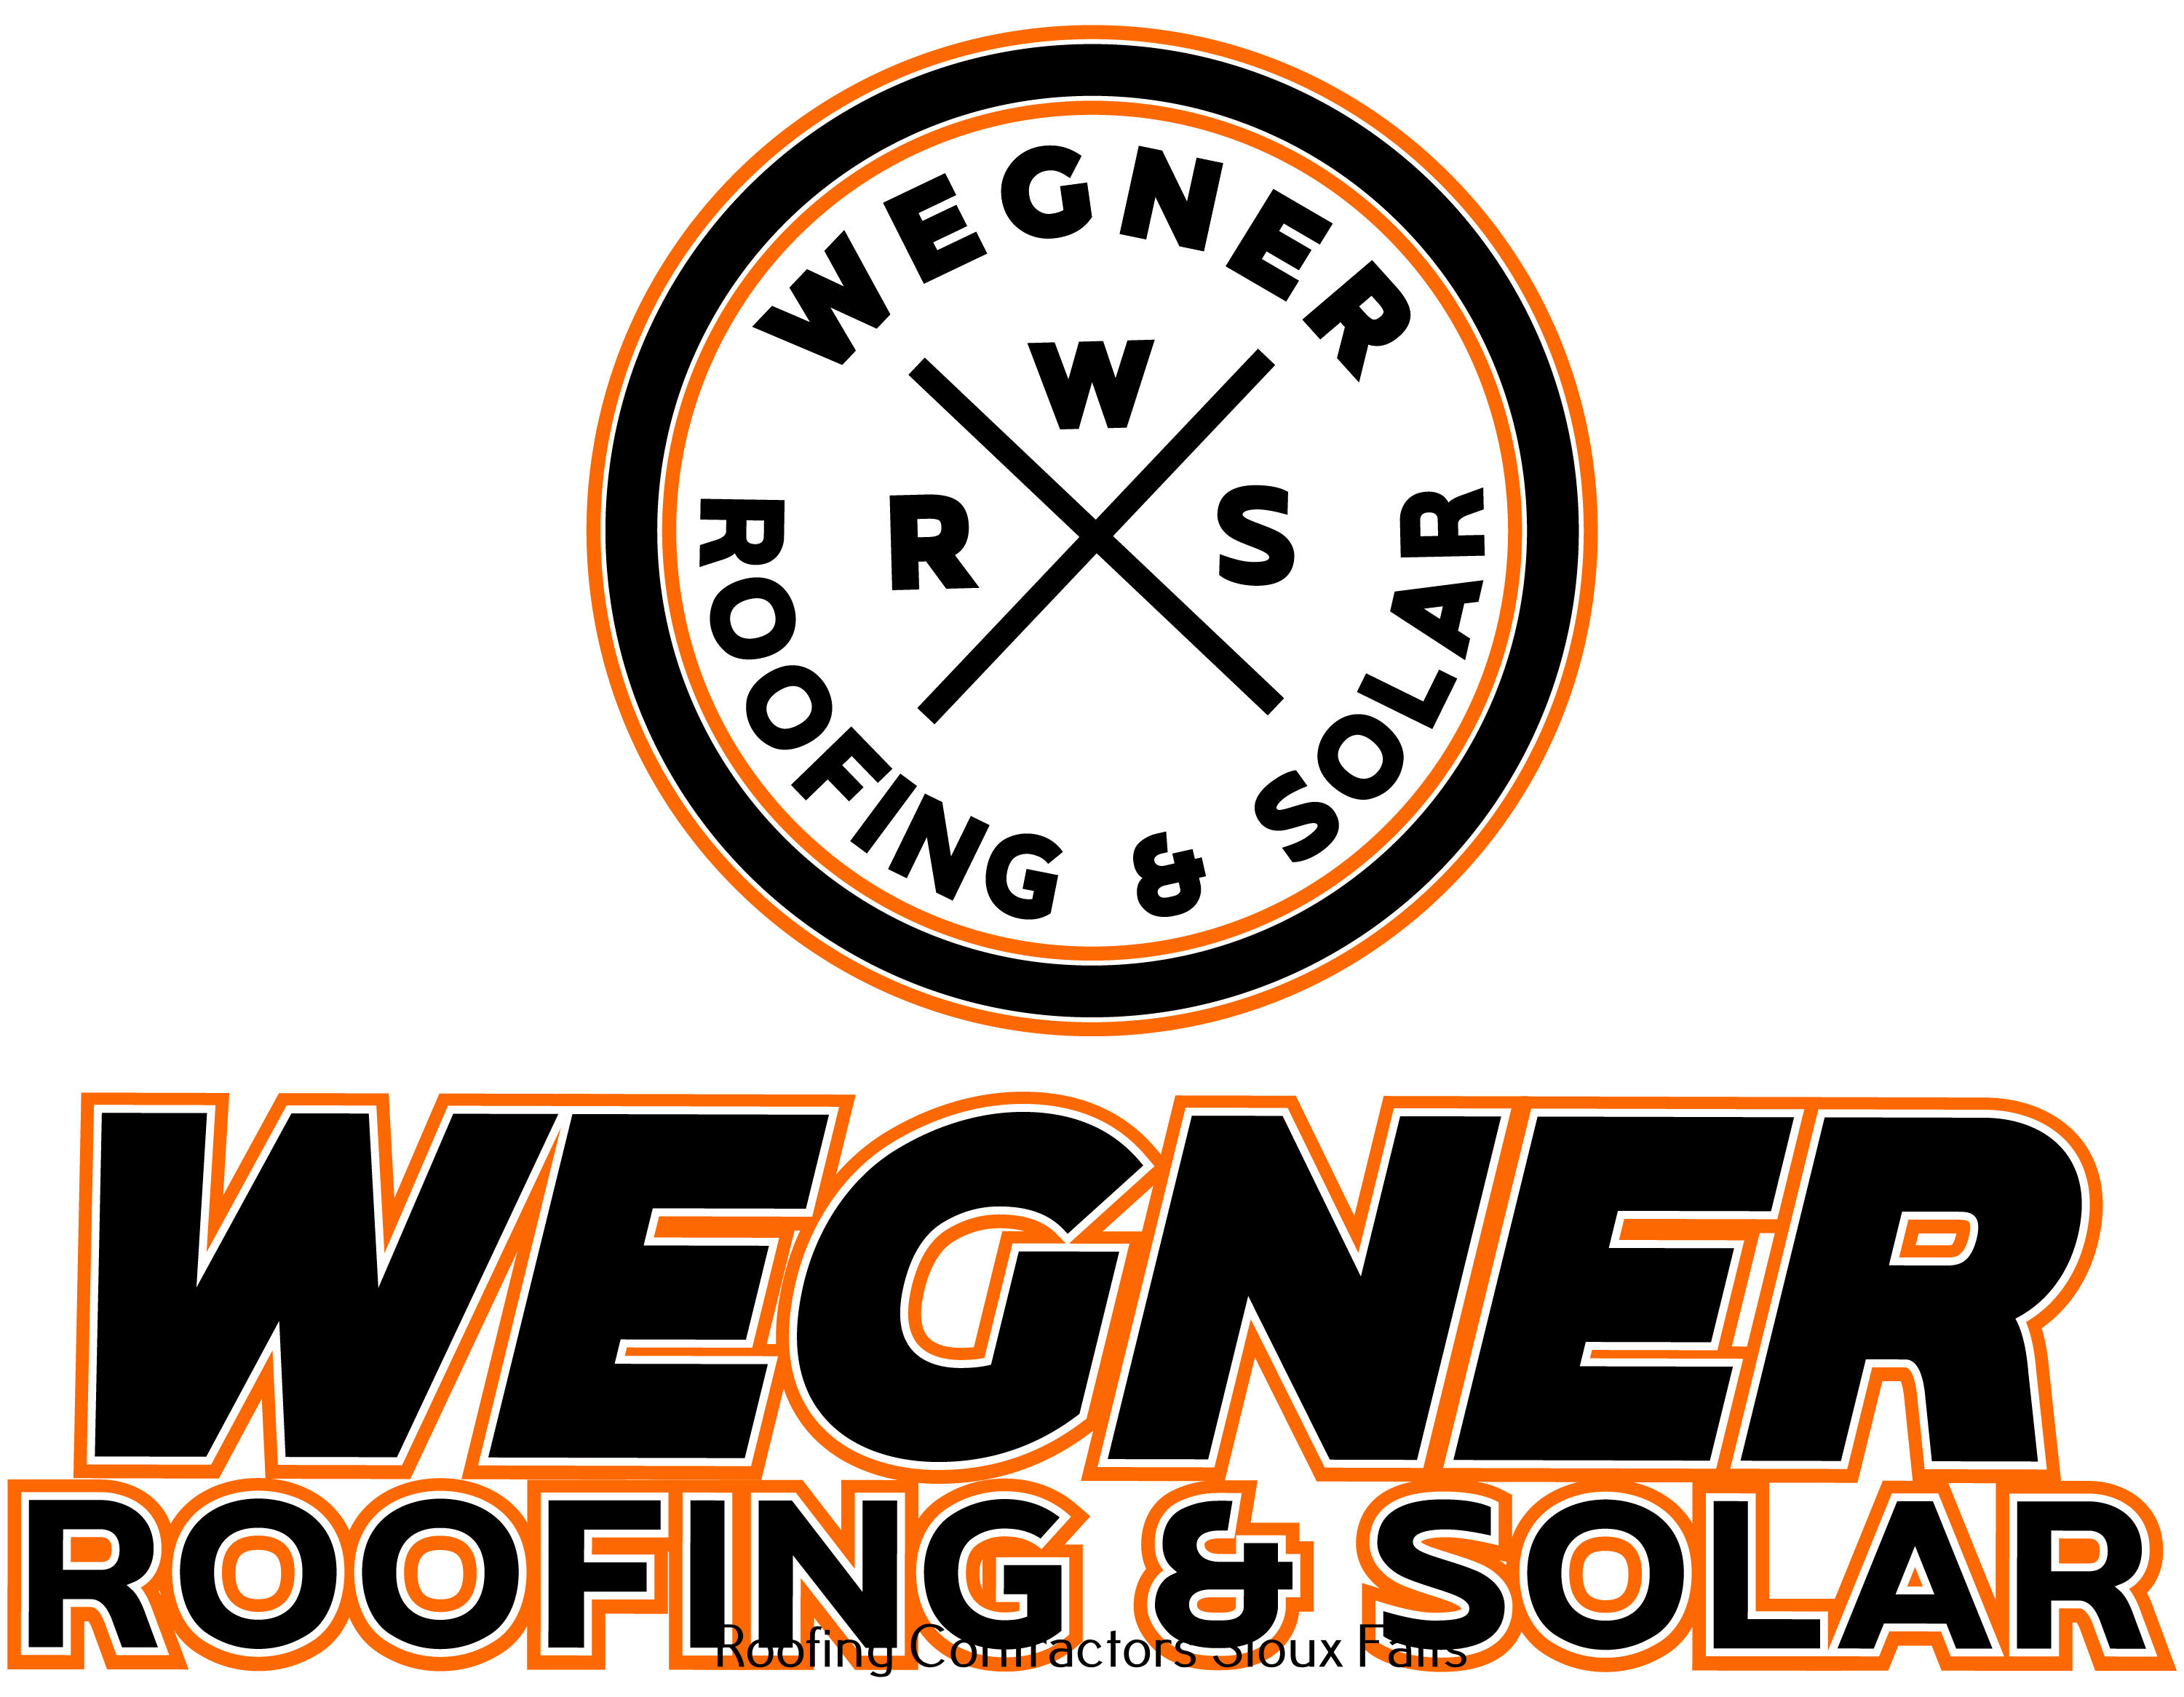 Wegner Roofing & Solar is a Professional Roofing company that Offers Comprehensive Roofing Services.